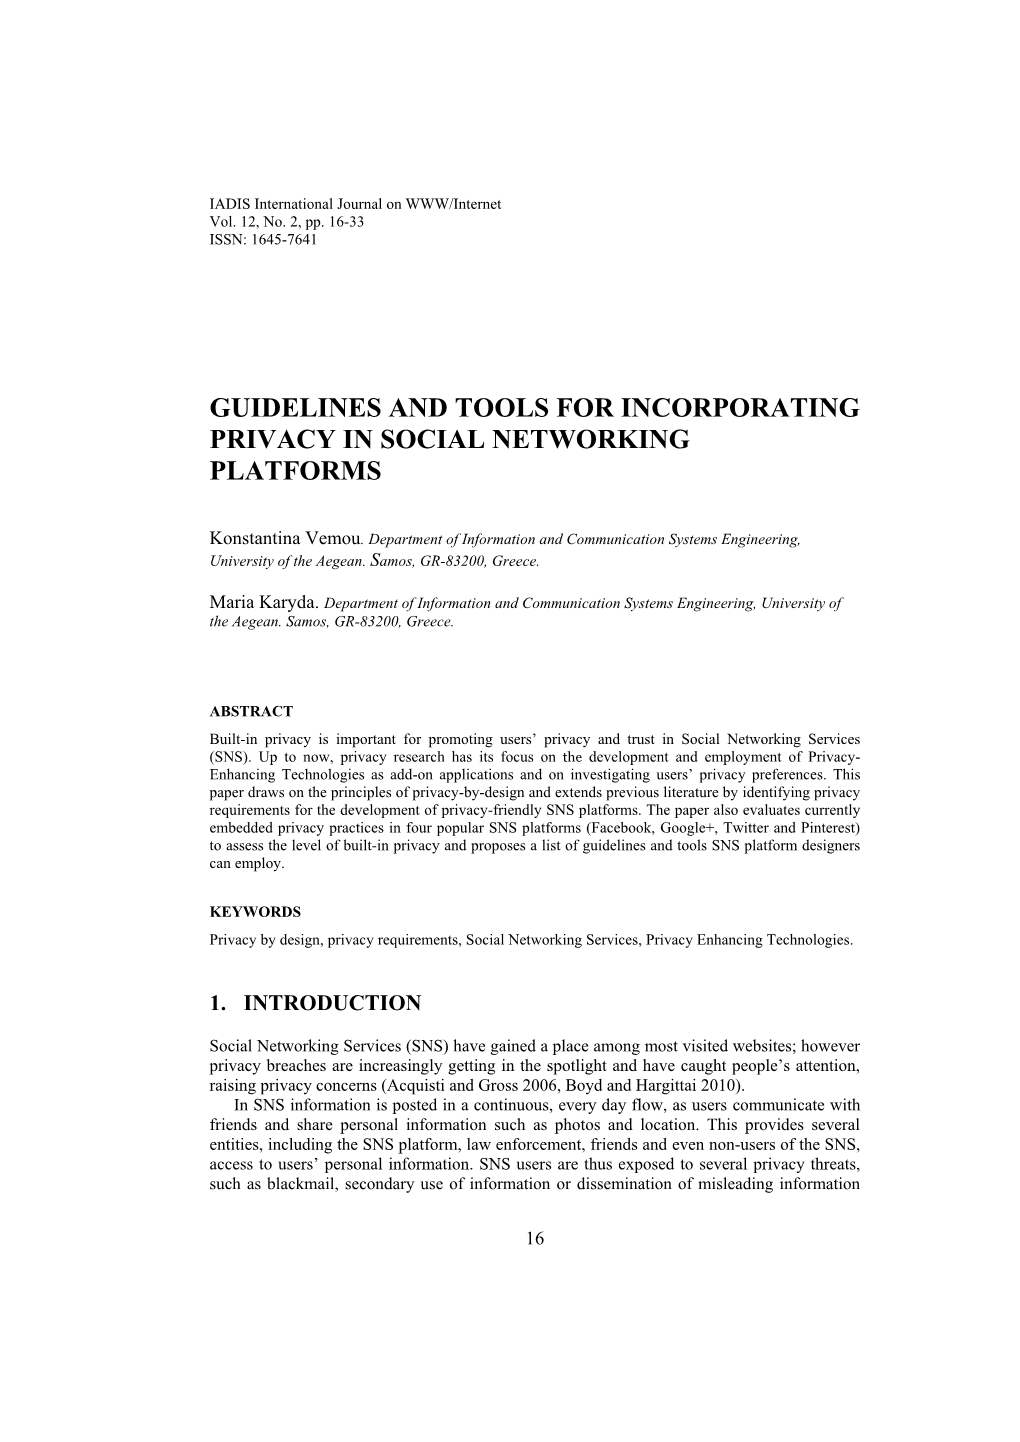 Guidelines and Tools for Incorporating Privacy in Social Networking Platforms